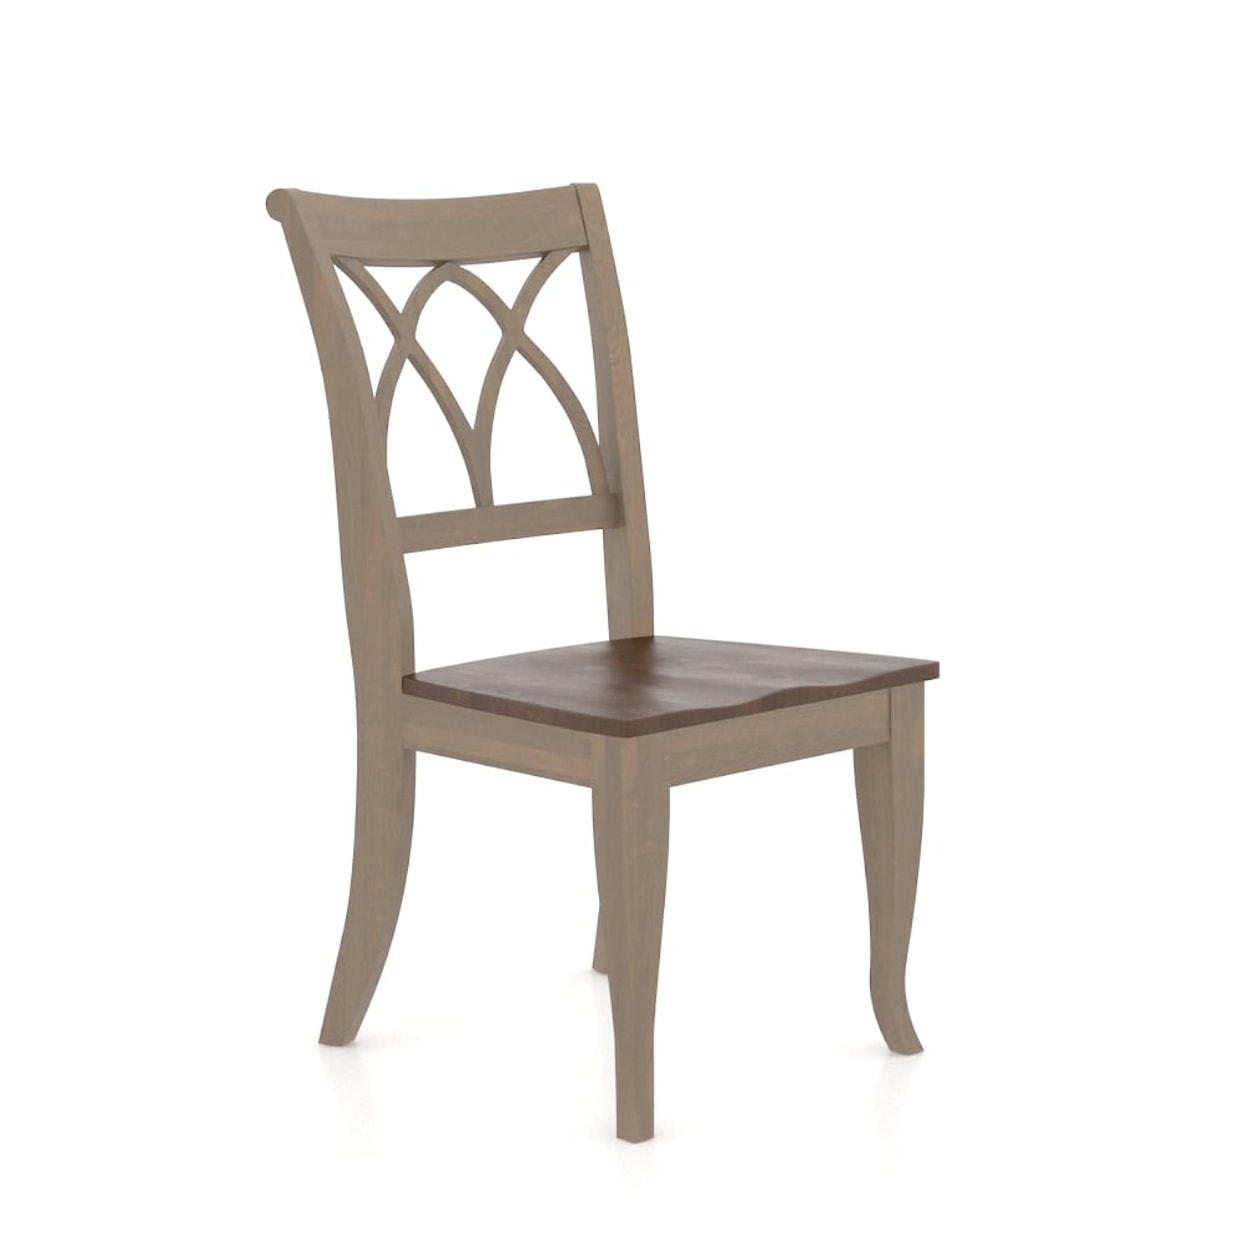 Canadel Gourmet Customizable Dining Chair